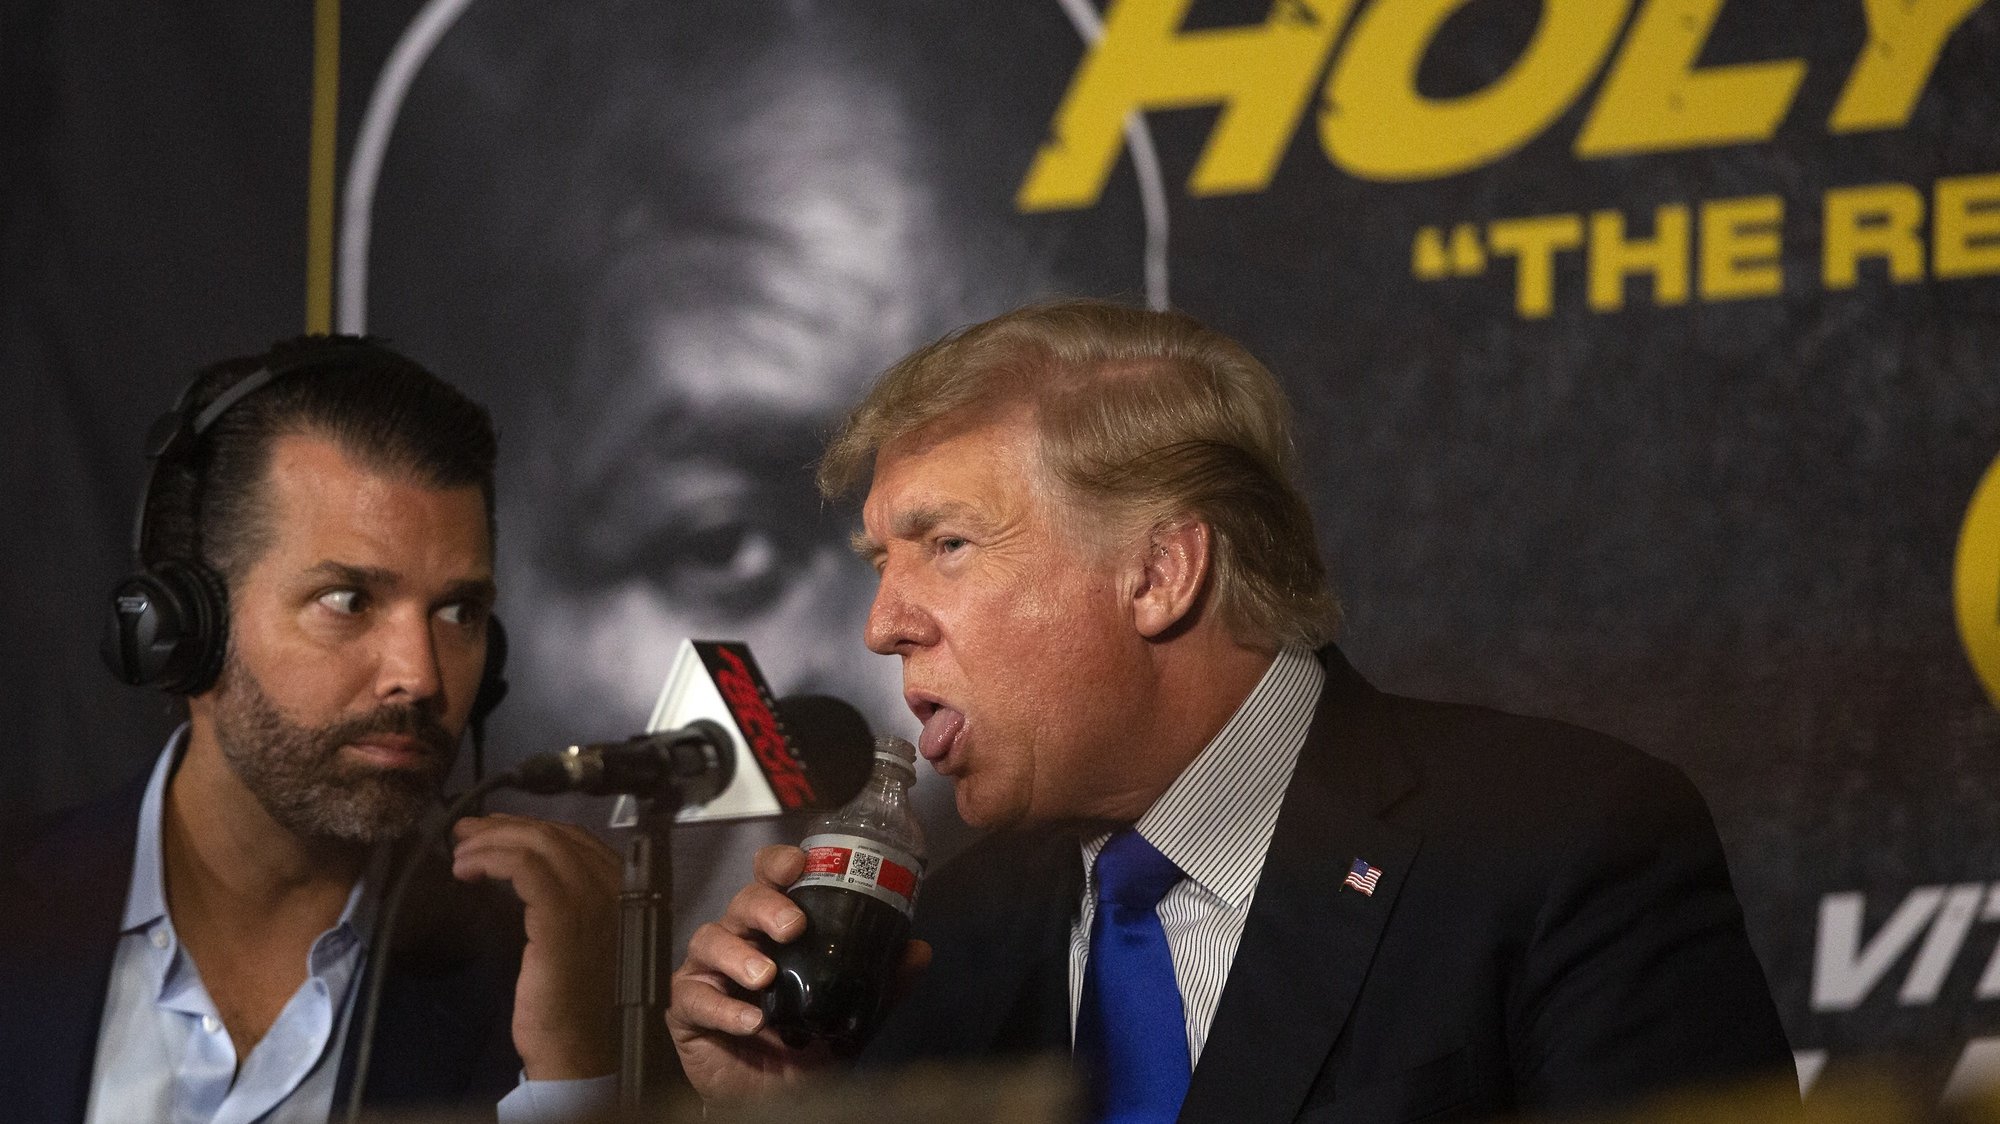 epa09462855 Former US President Donald J. Trump (R), with his son Donald Trump Jr. (L), attends the Former Heavyweight boxing champion Evander Holyfield against Former UFC Heavyweight World Champion Vitor Belfort &#039;Legends II&#039; Heavyweight match in Hard Rock LIVE at Seminole Hard Rock Hotel and Casino in Hollywood, Florida, USA, 11 September 2021.  EPA/CRISTOBAL HERRERA-ULASHKEVICH